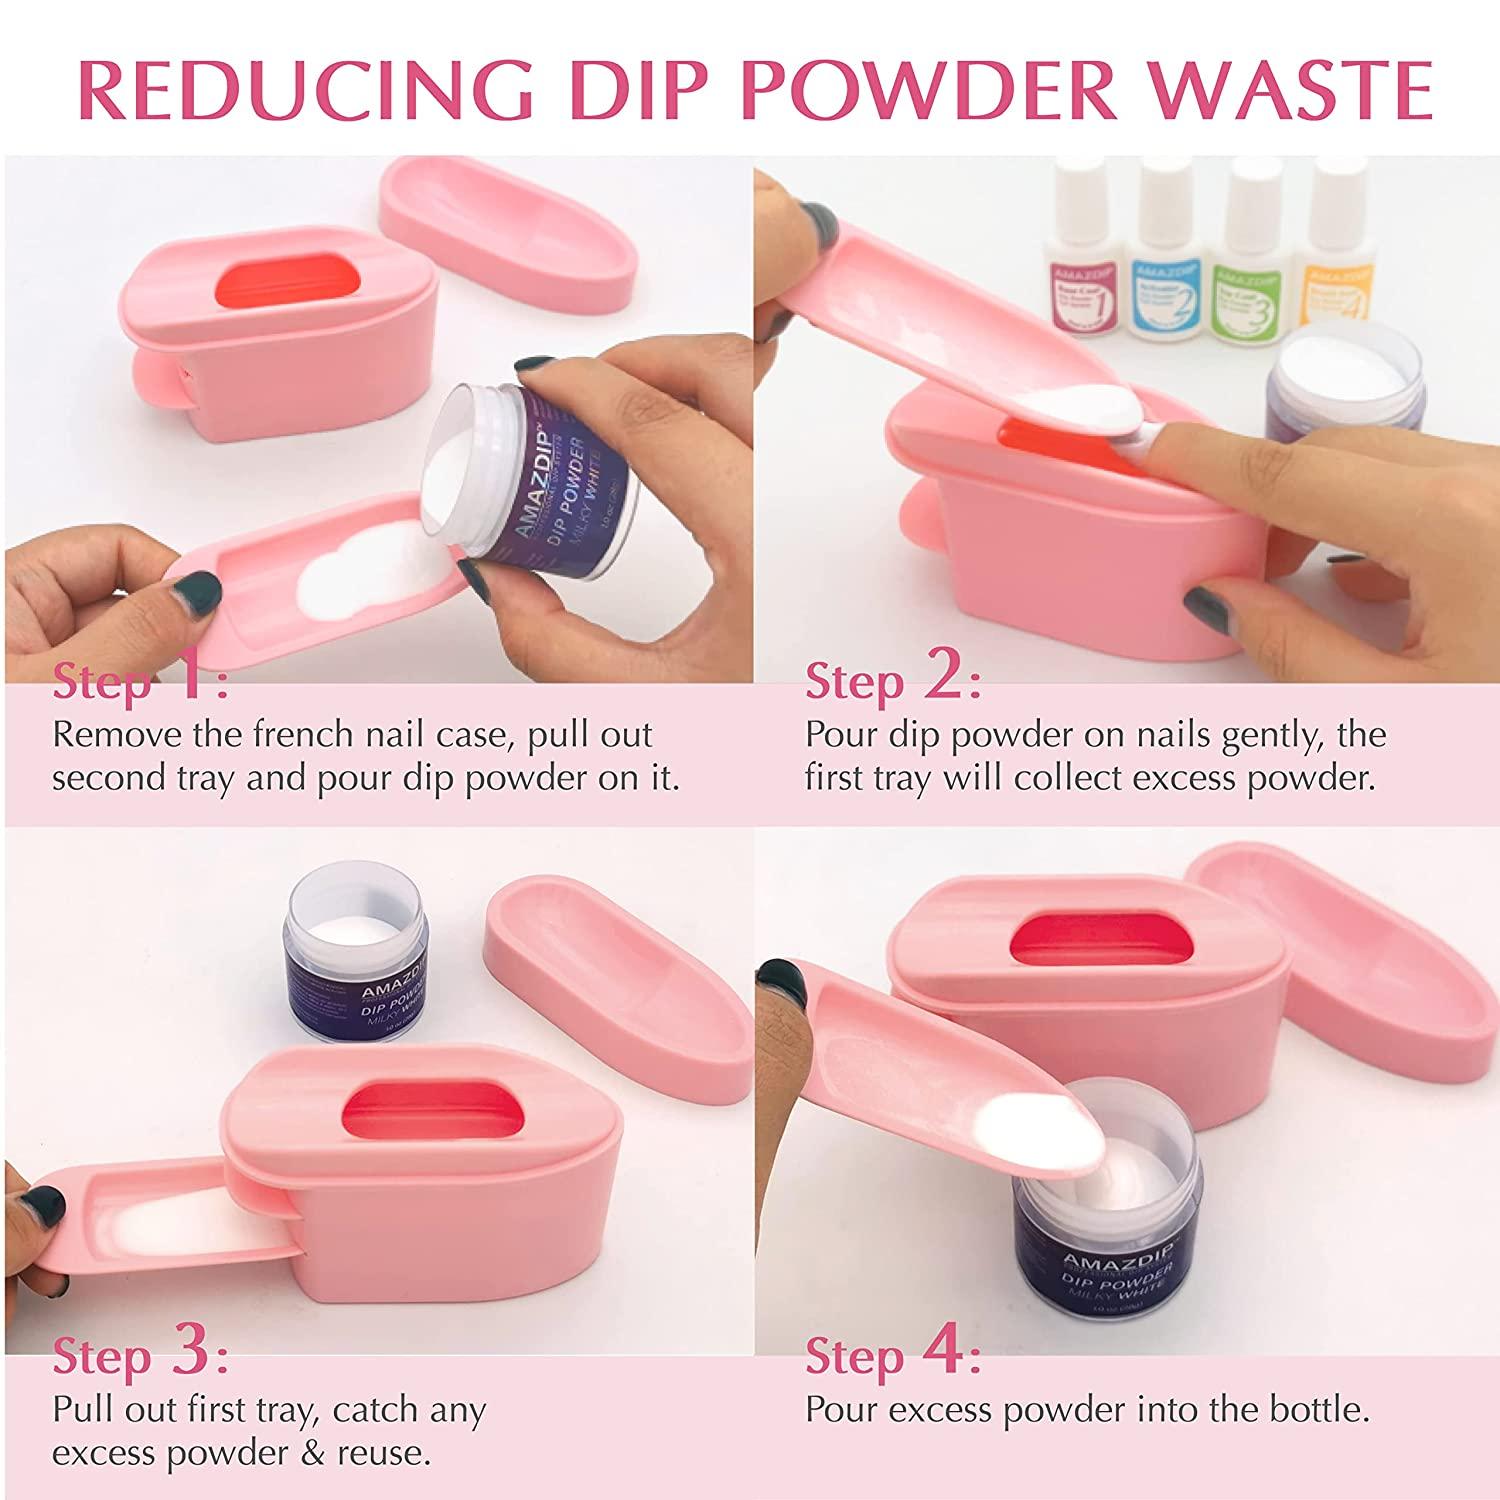 2pcs Dip Powder Recycling Tray System with Scoop & French Dip Nail Tray  with Dust Cleaning Brush, AMAZDIP Dipping Powder Nail Glitter Holder Saver  Accessories, 2-in-1 Multi Design - White & Pink